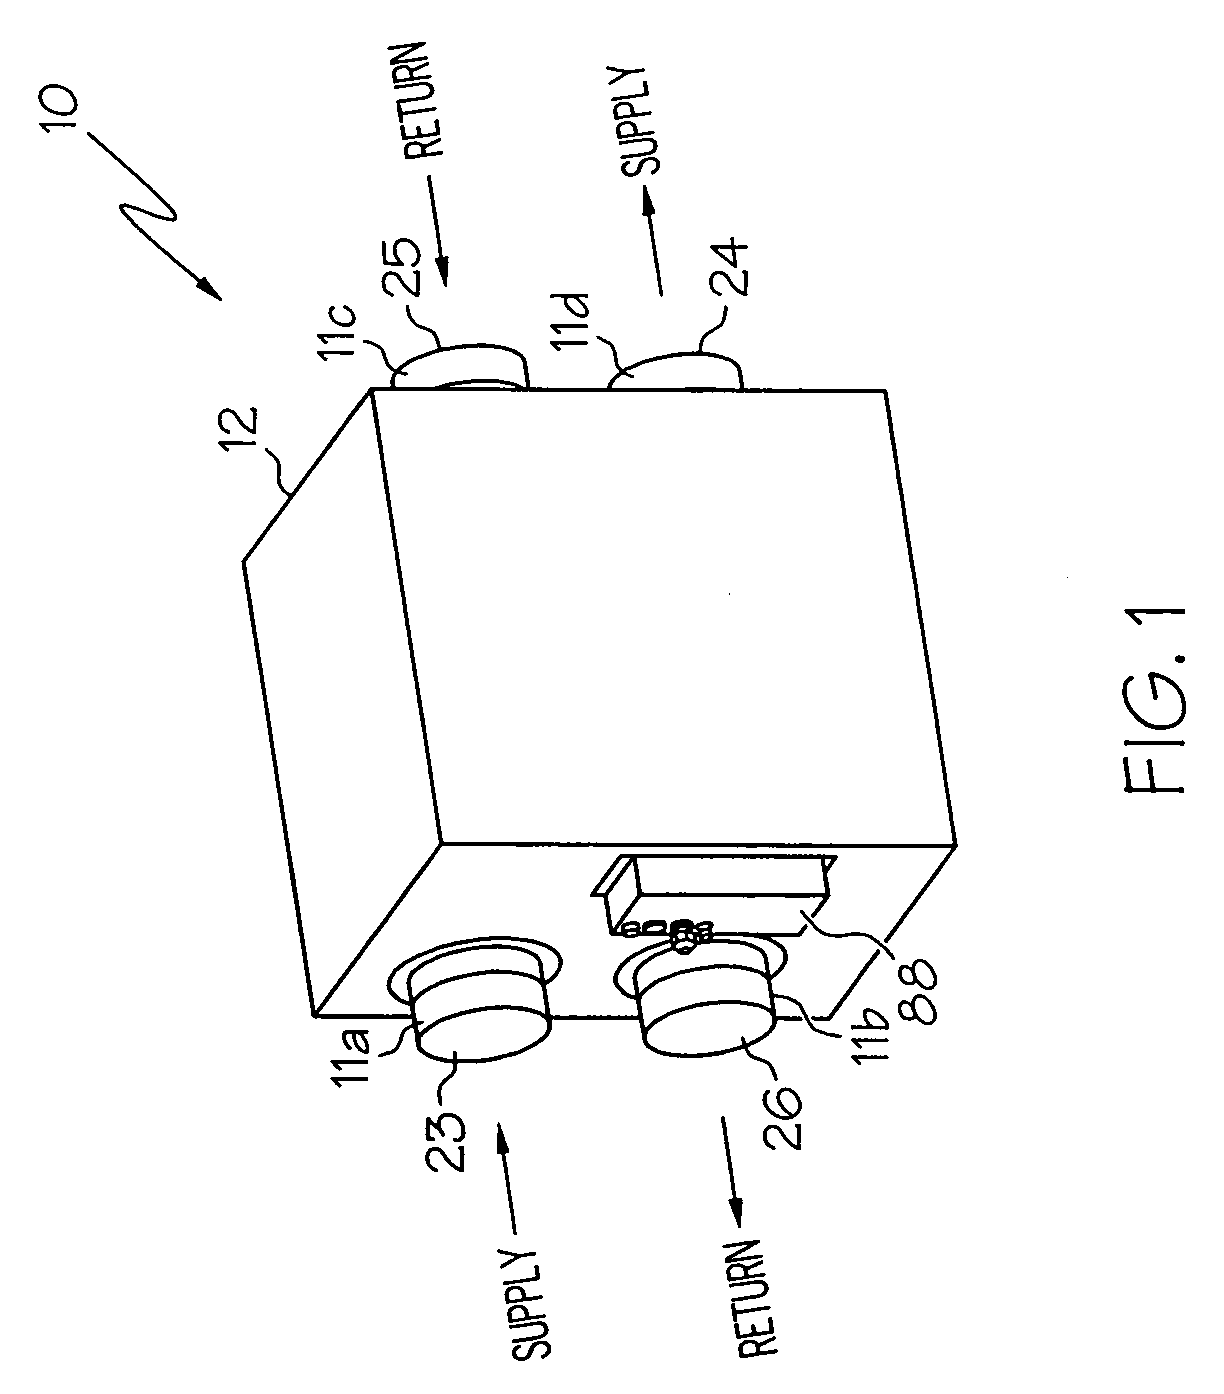 Heat and energy recovery ventilators and methods of use